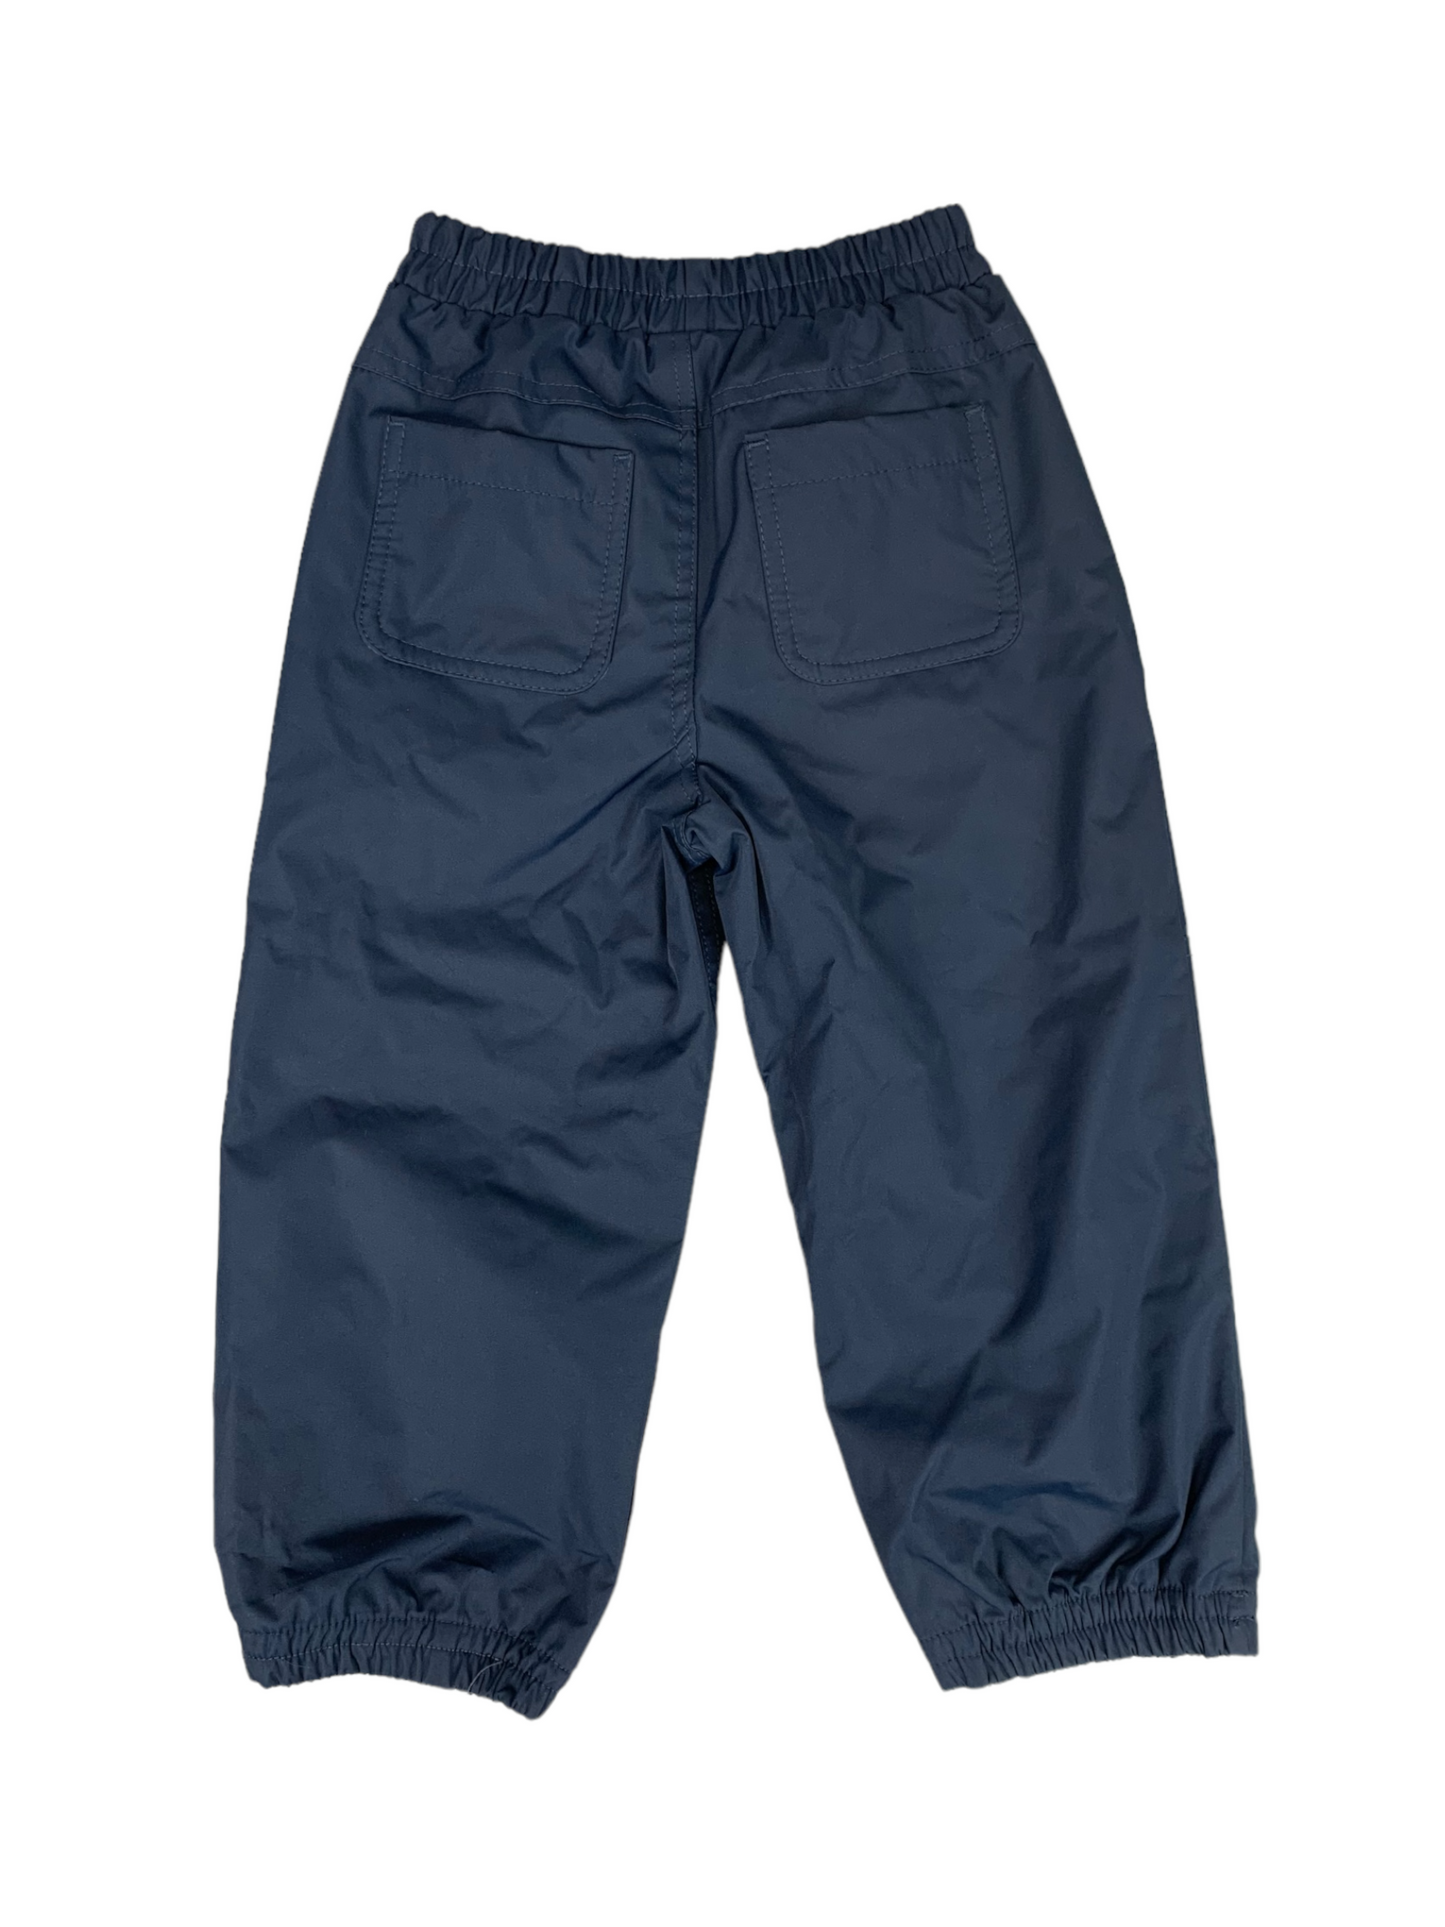 Nanö navy mid-season trousers for children 2 to 14 years